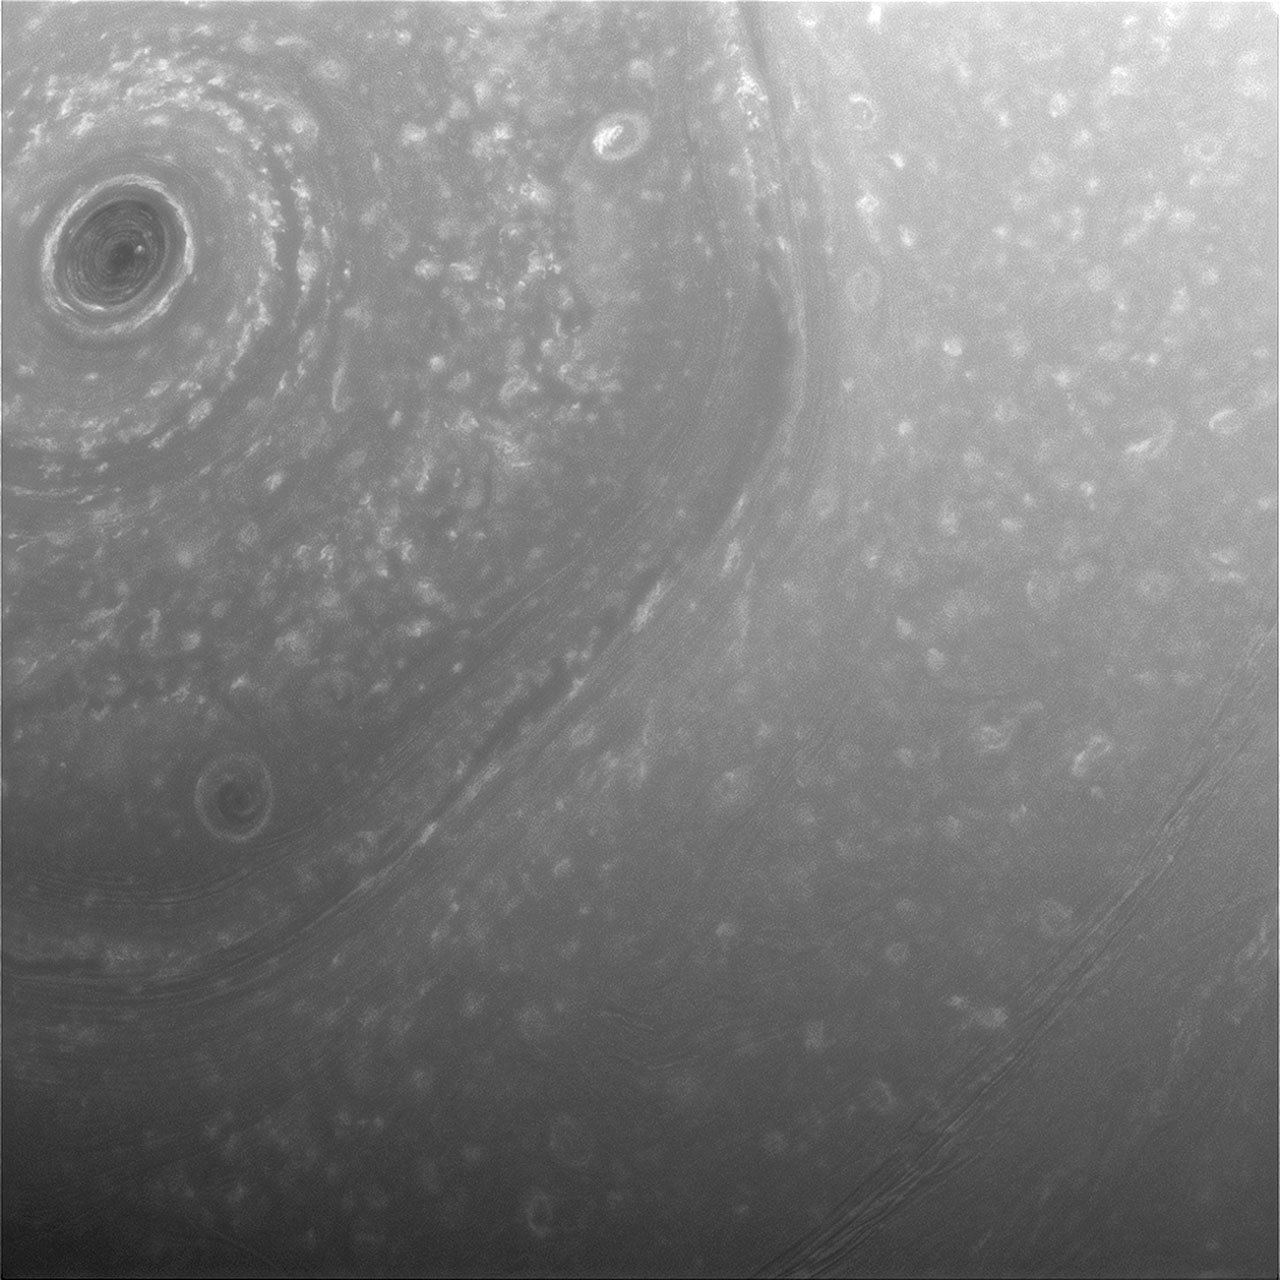 This view from the Cassini spacecraft was obtained about two days before its first close pass by the outer edges of Saturn’s main rings. (NASA/JPL-Caltech/Space Science Institute)